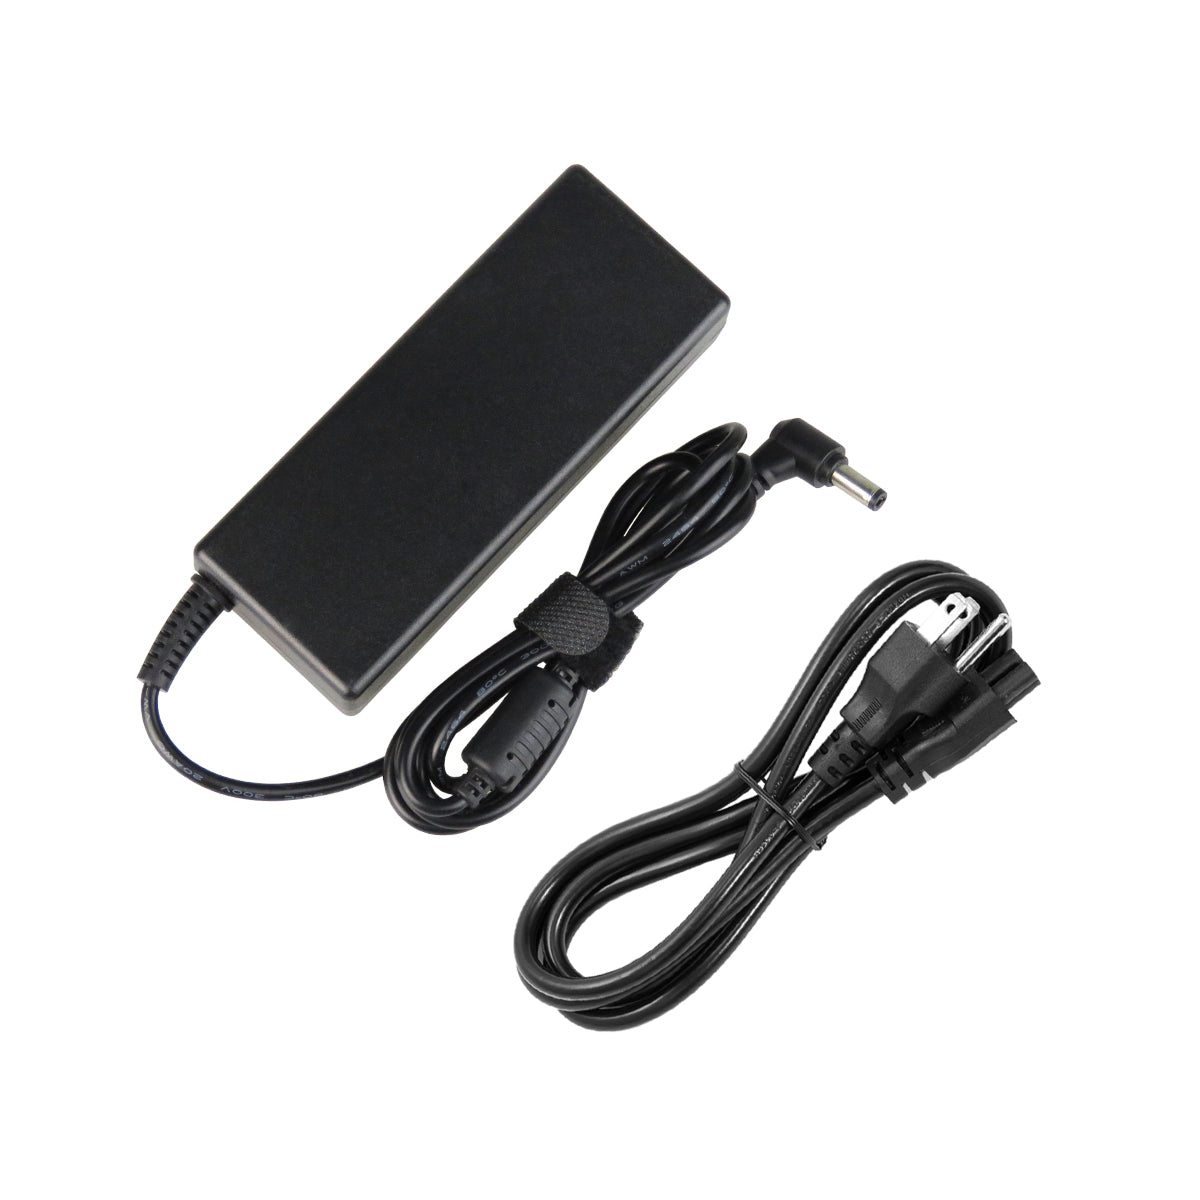 AC Adapter Charger for ASUS X72VR Notebook.